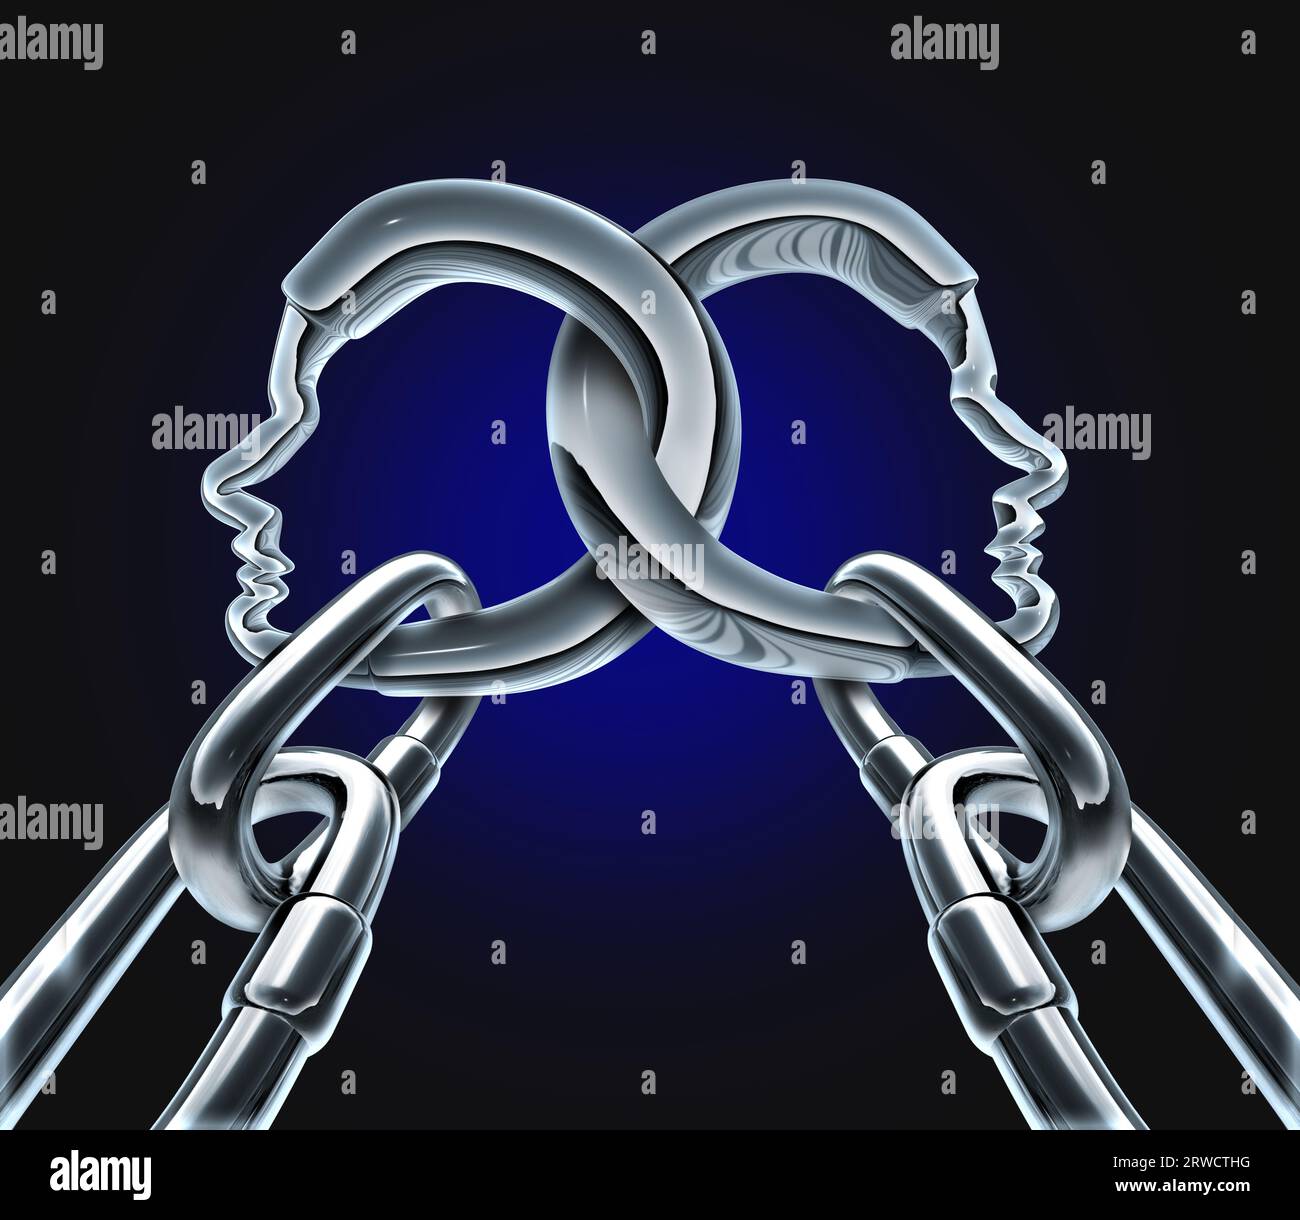 Strength In Unity and business group partnership as two metal chains shaped as a three dimensional human head linked together in a strong team network Stock Photo